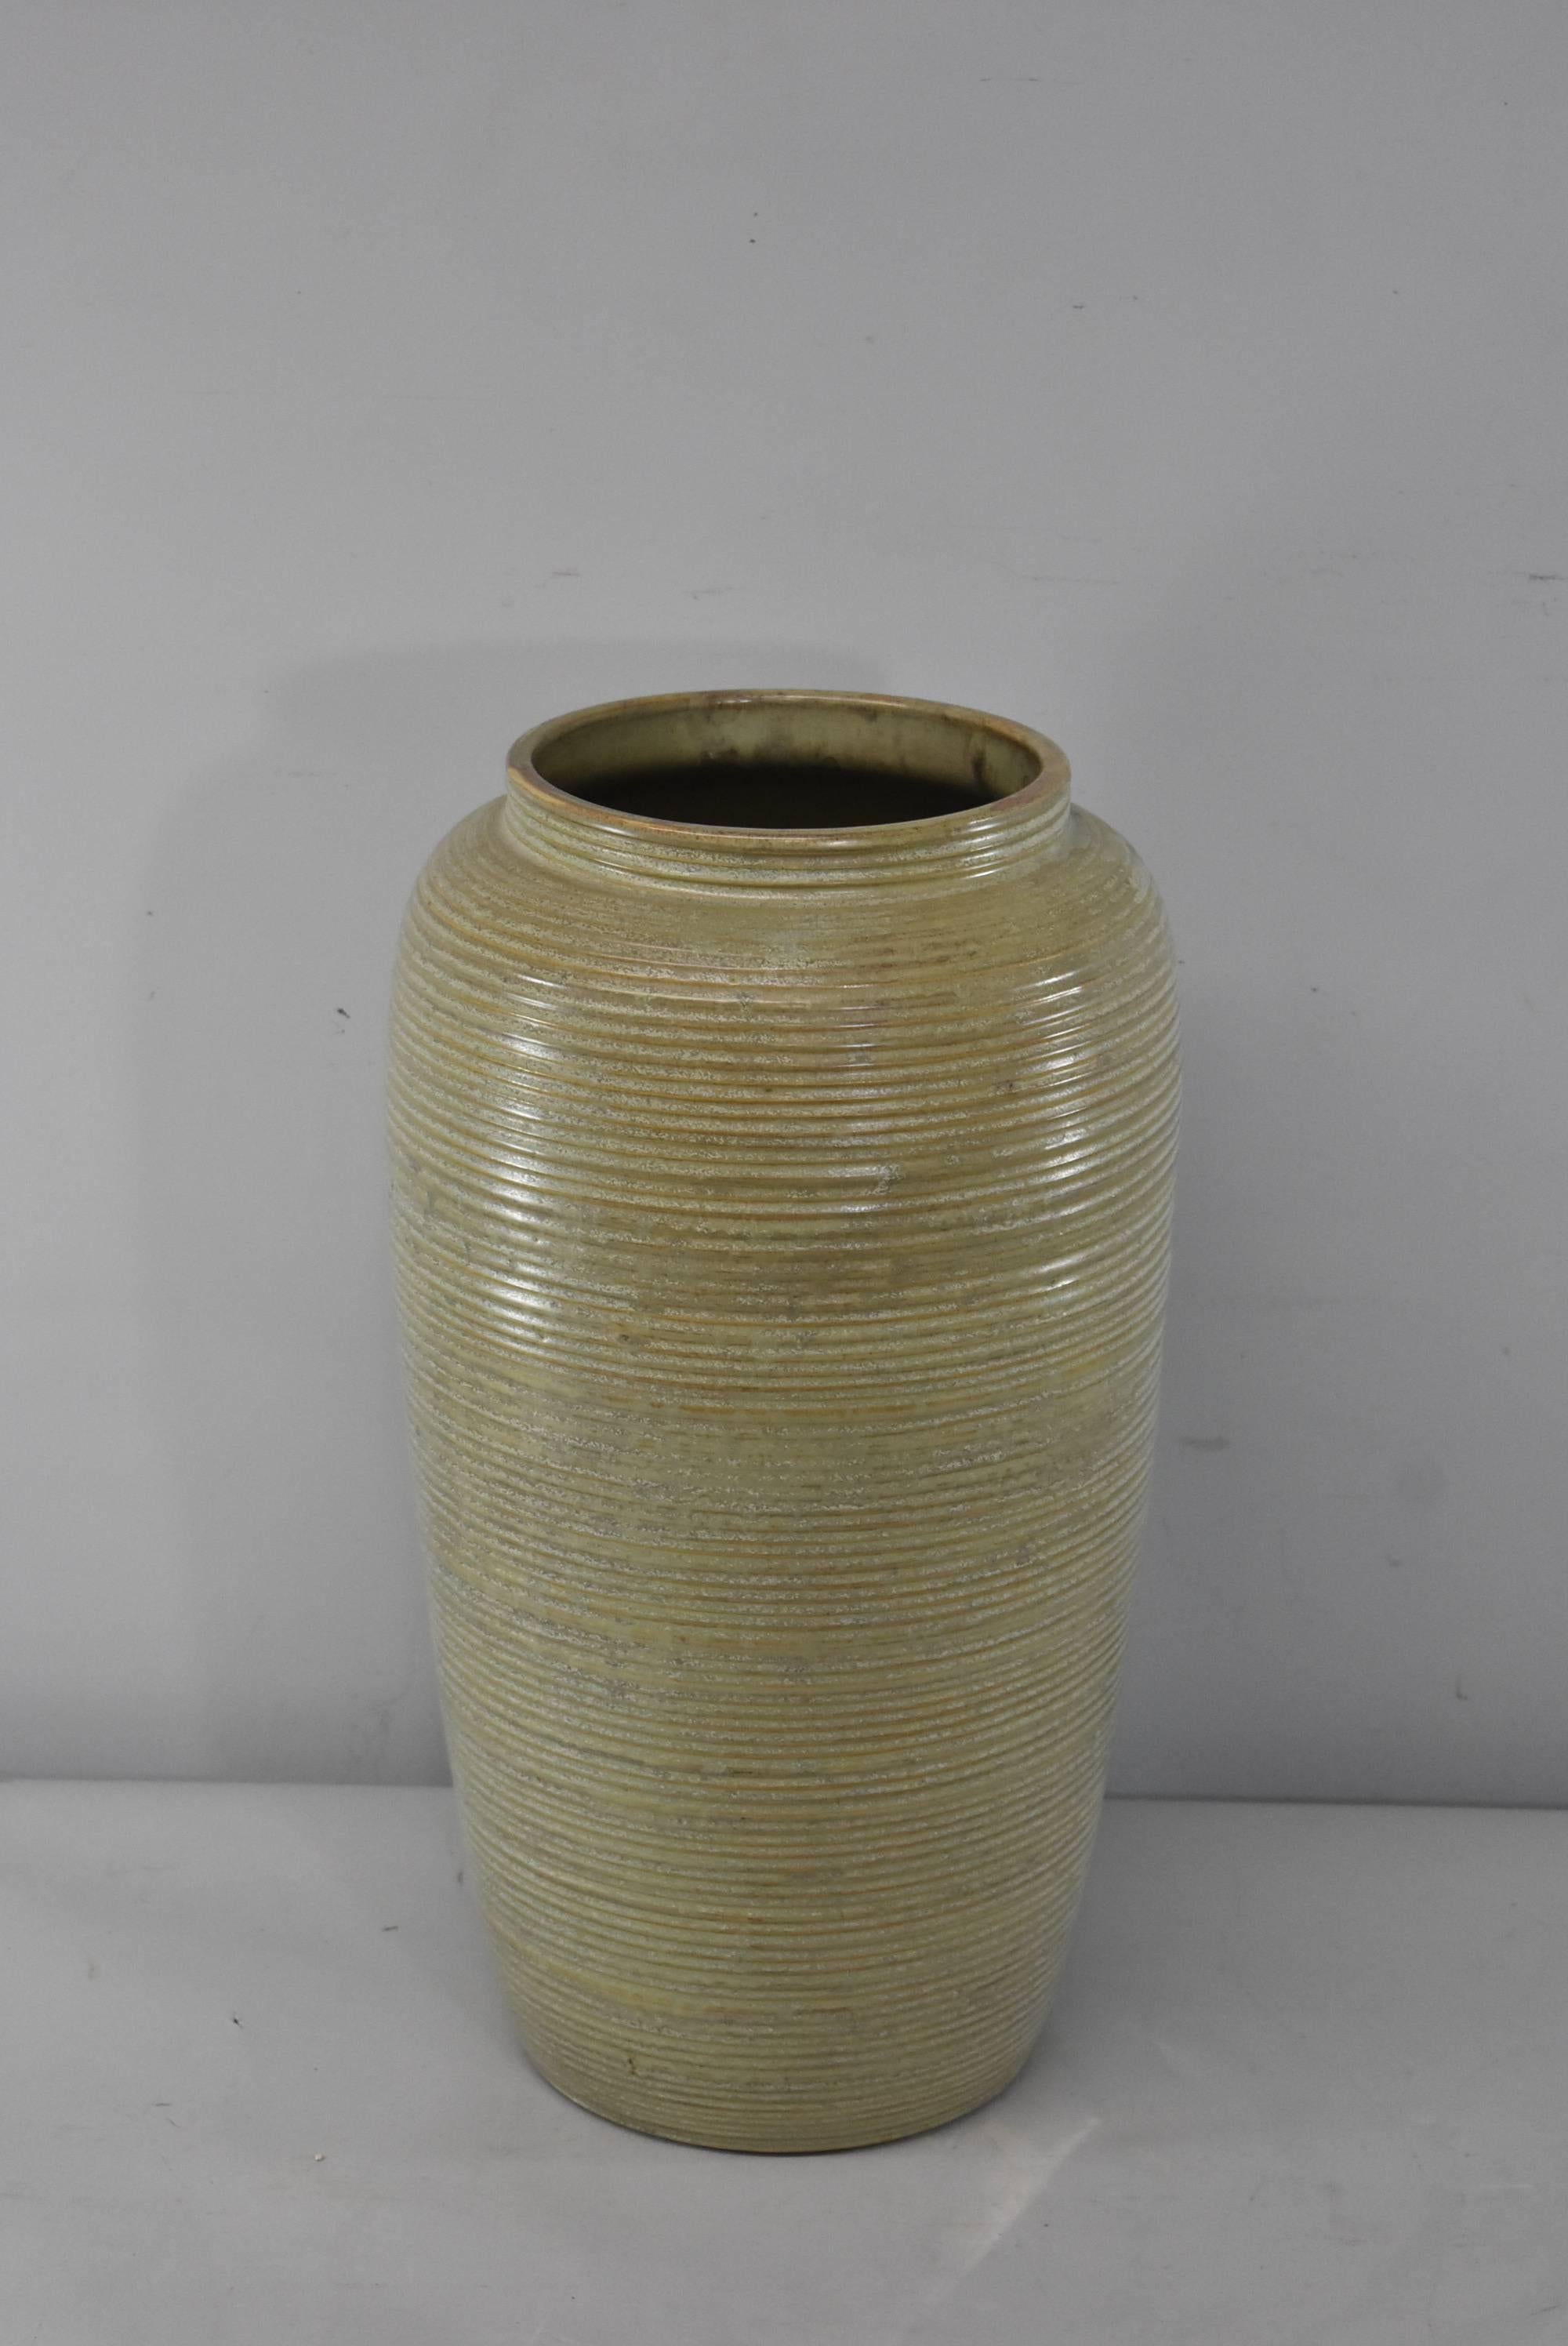 A Mid-Century Monmouth Pottery floor vase, circa 1950. A large form monochromatic glazed pottery vase with ribbed detail in a grey/green shade. Very good condition. Dimensions: 8.5